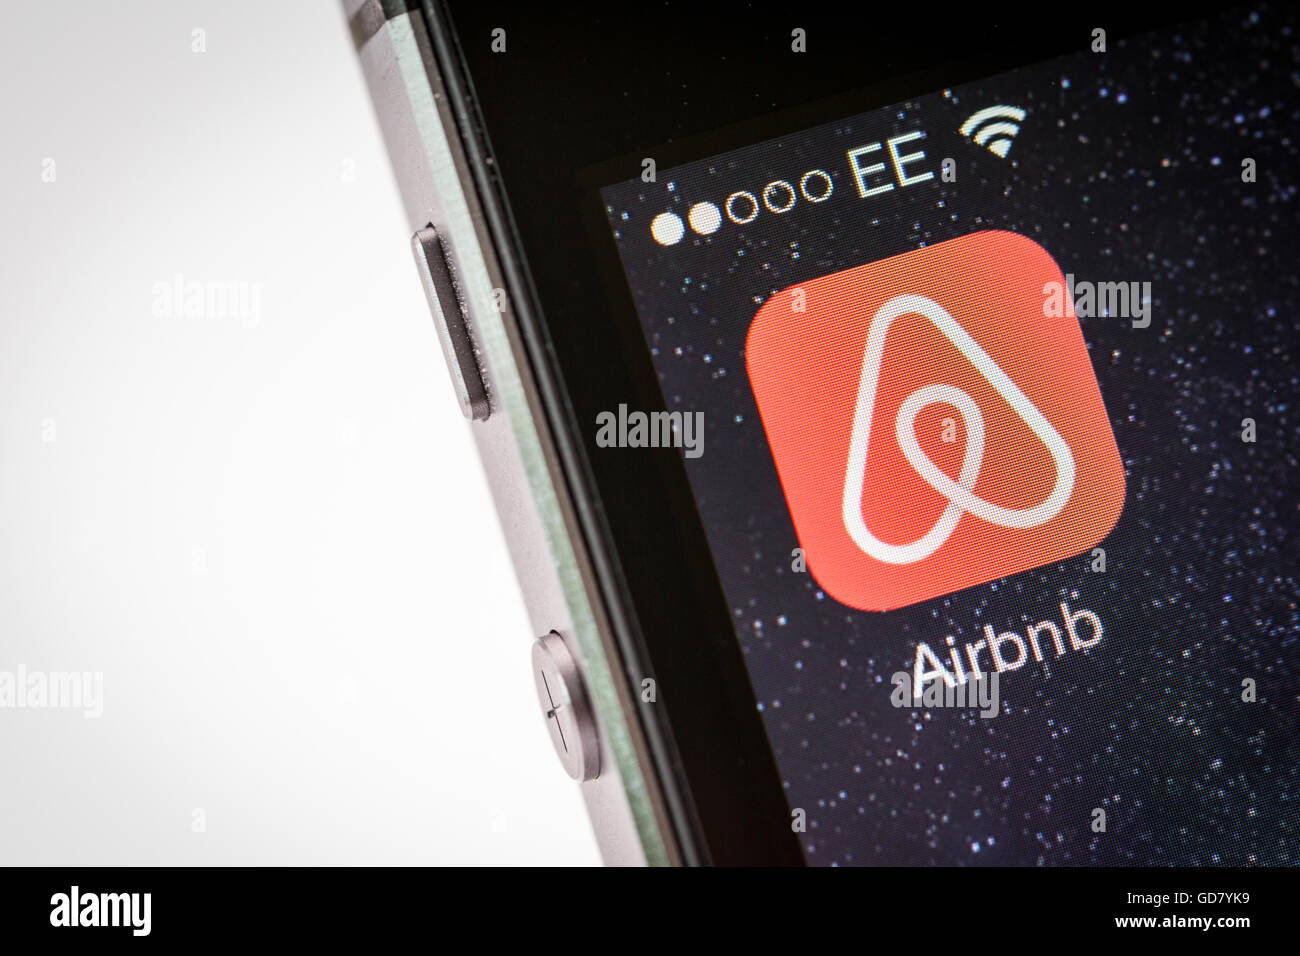 Airbnb App on an iPhone smart phone Stock Photo